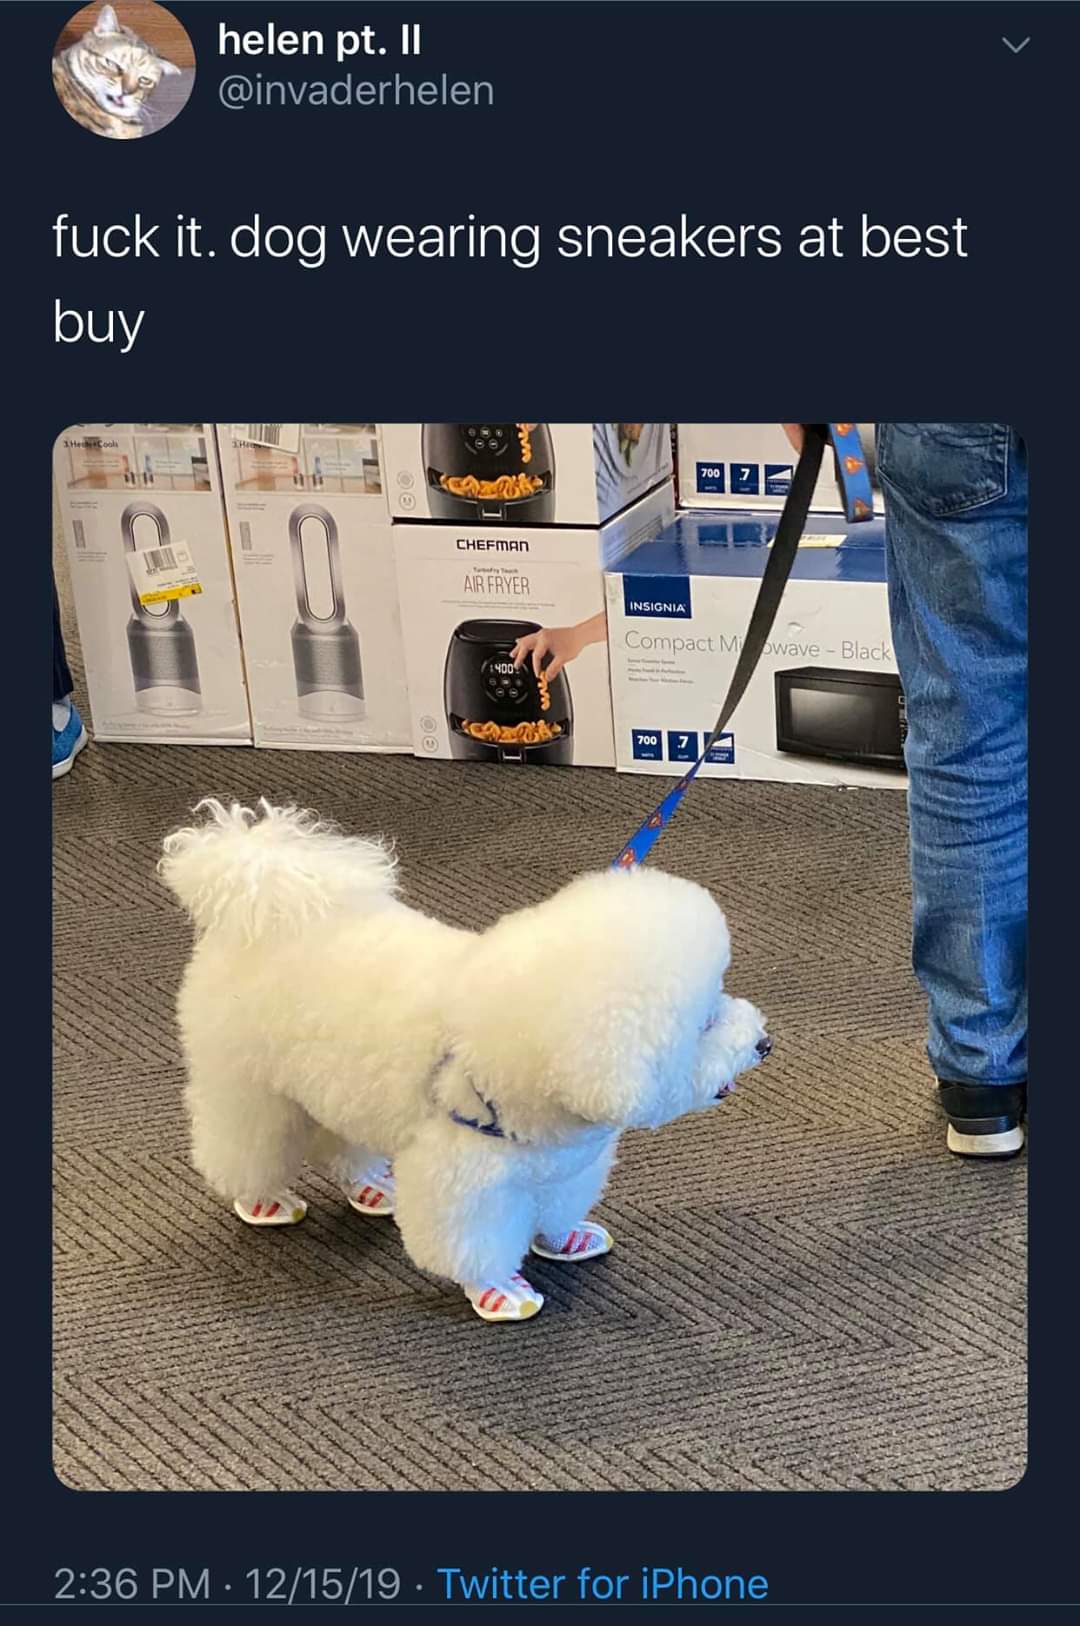 white twitter - fuck it. dog wearing sneakers at best buy 700 Chefman Air Fryer Insignia Compact M pwave Black 121519. Twitter for iPhone